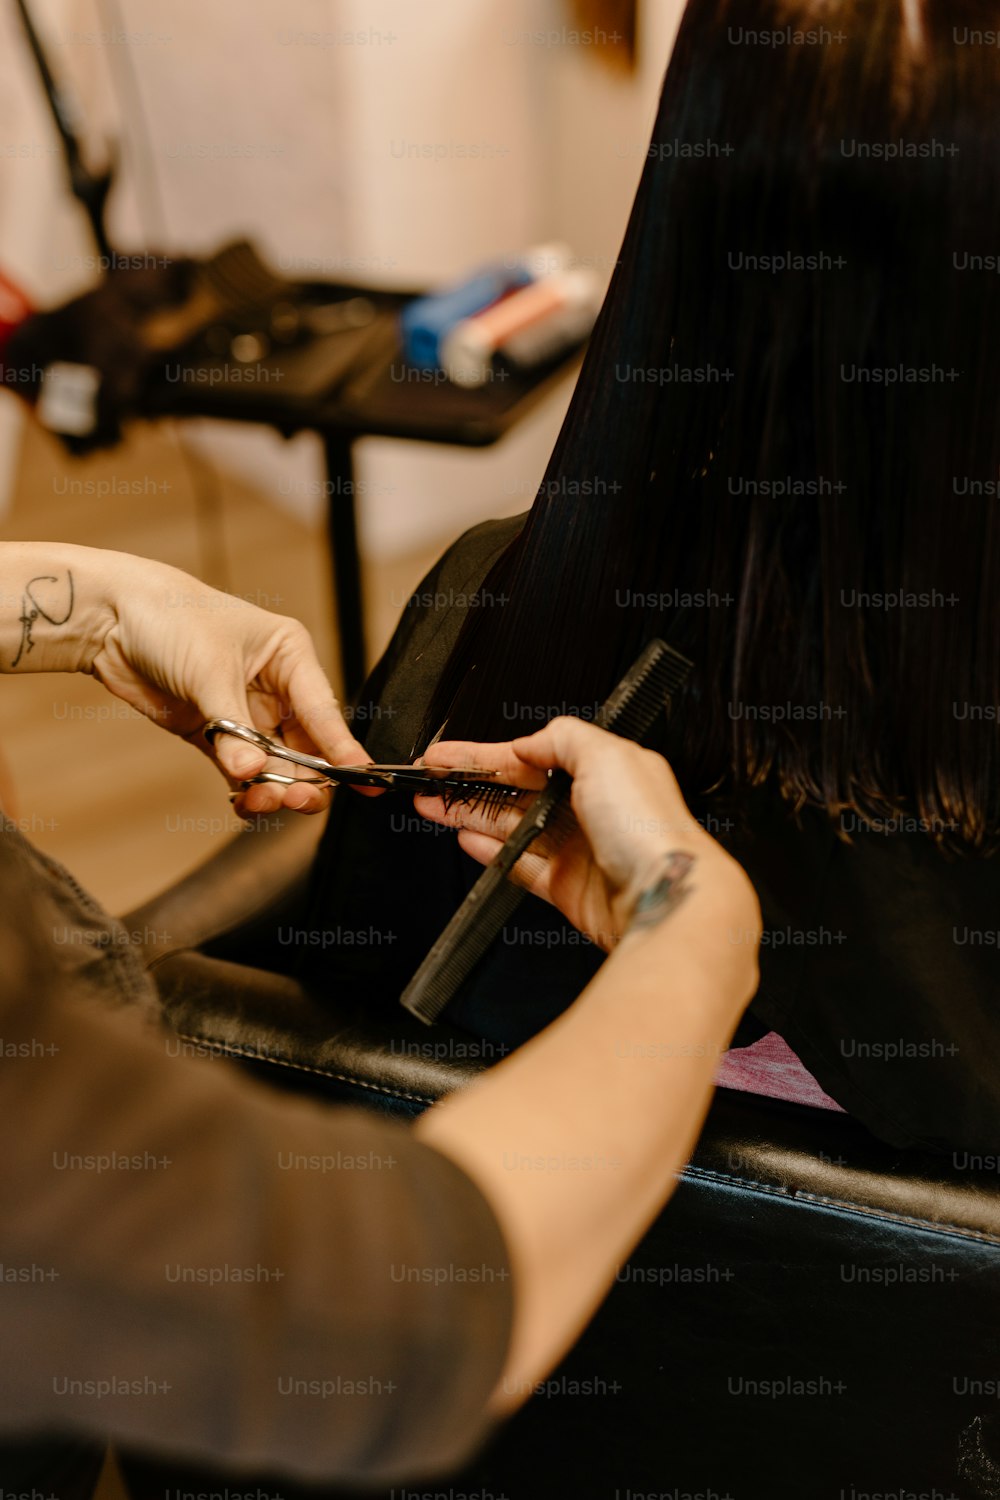 a woman cutting another woman's hair with scissors